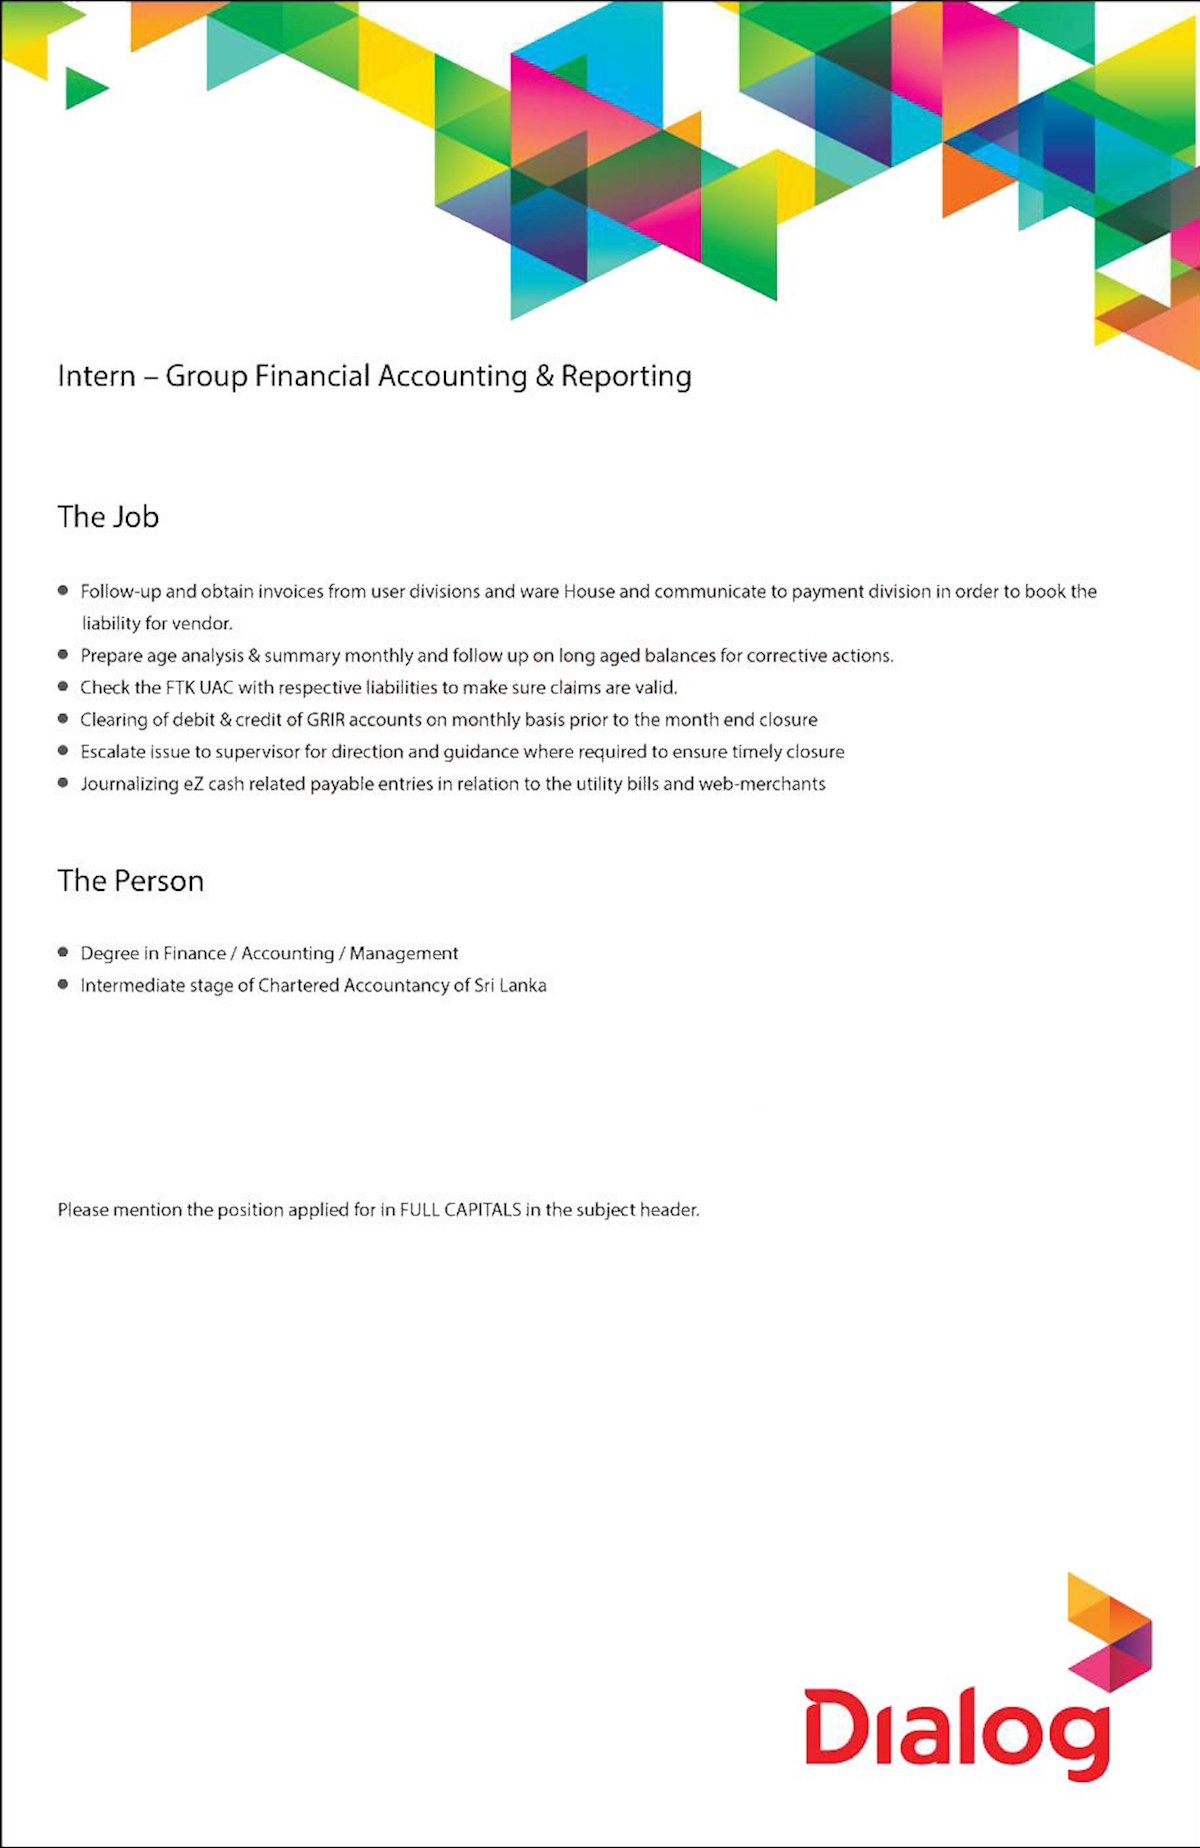 Intern - Group Financial Accounting and Reporting